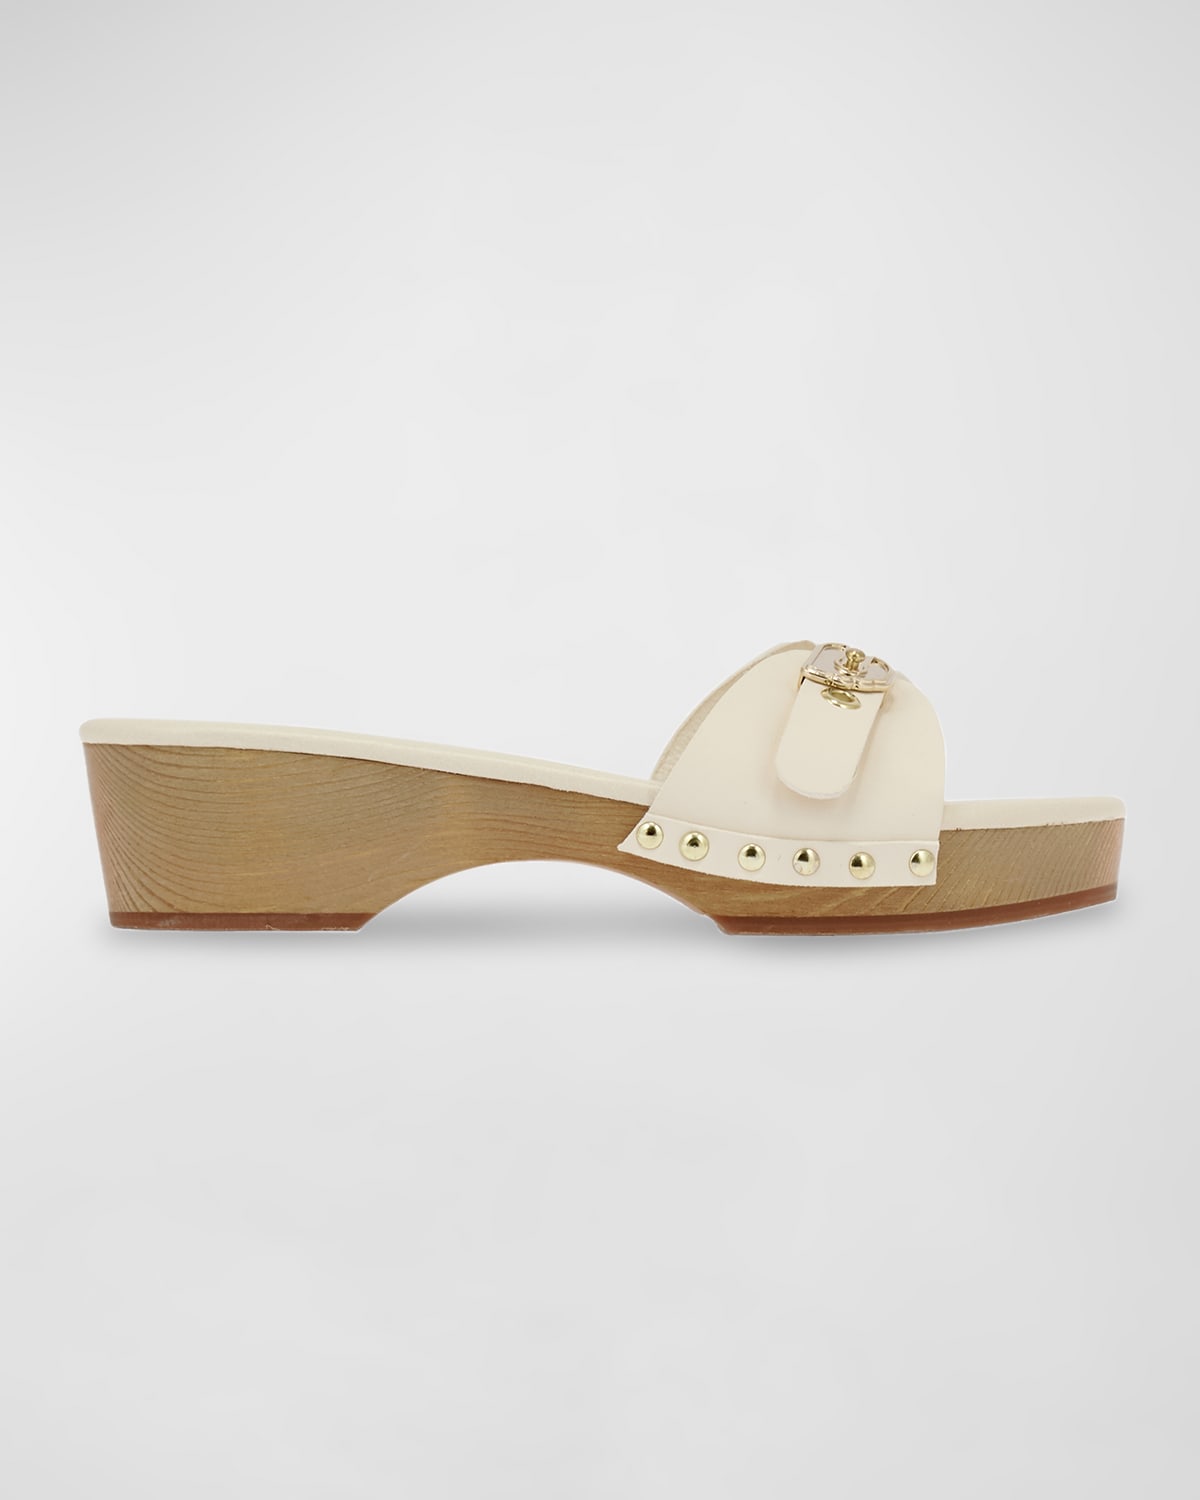 Tory Burch Ines Leather Logo Clog Sandals | Neiman Marcus